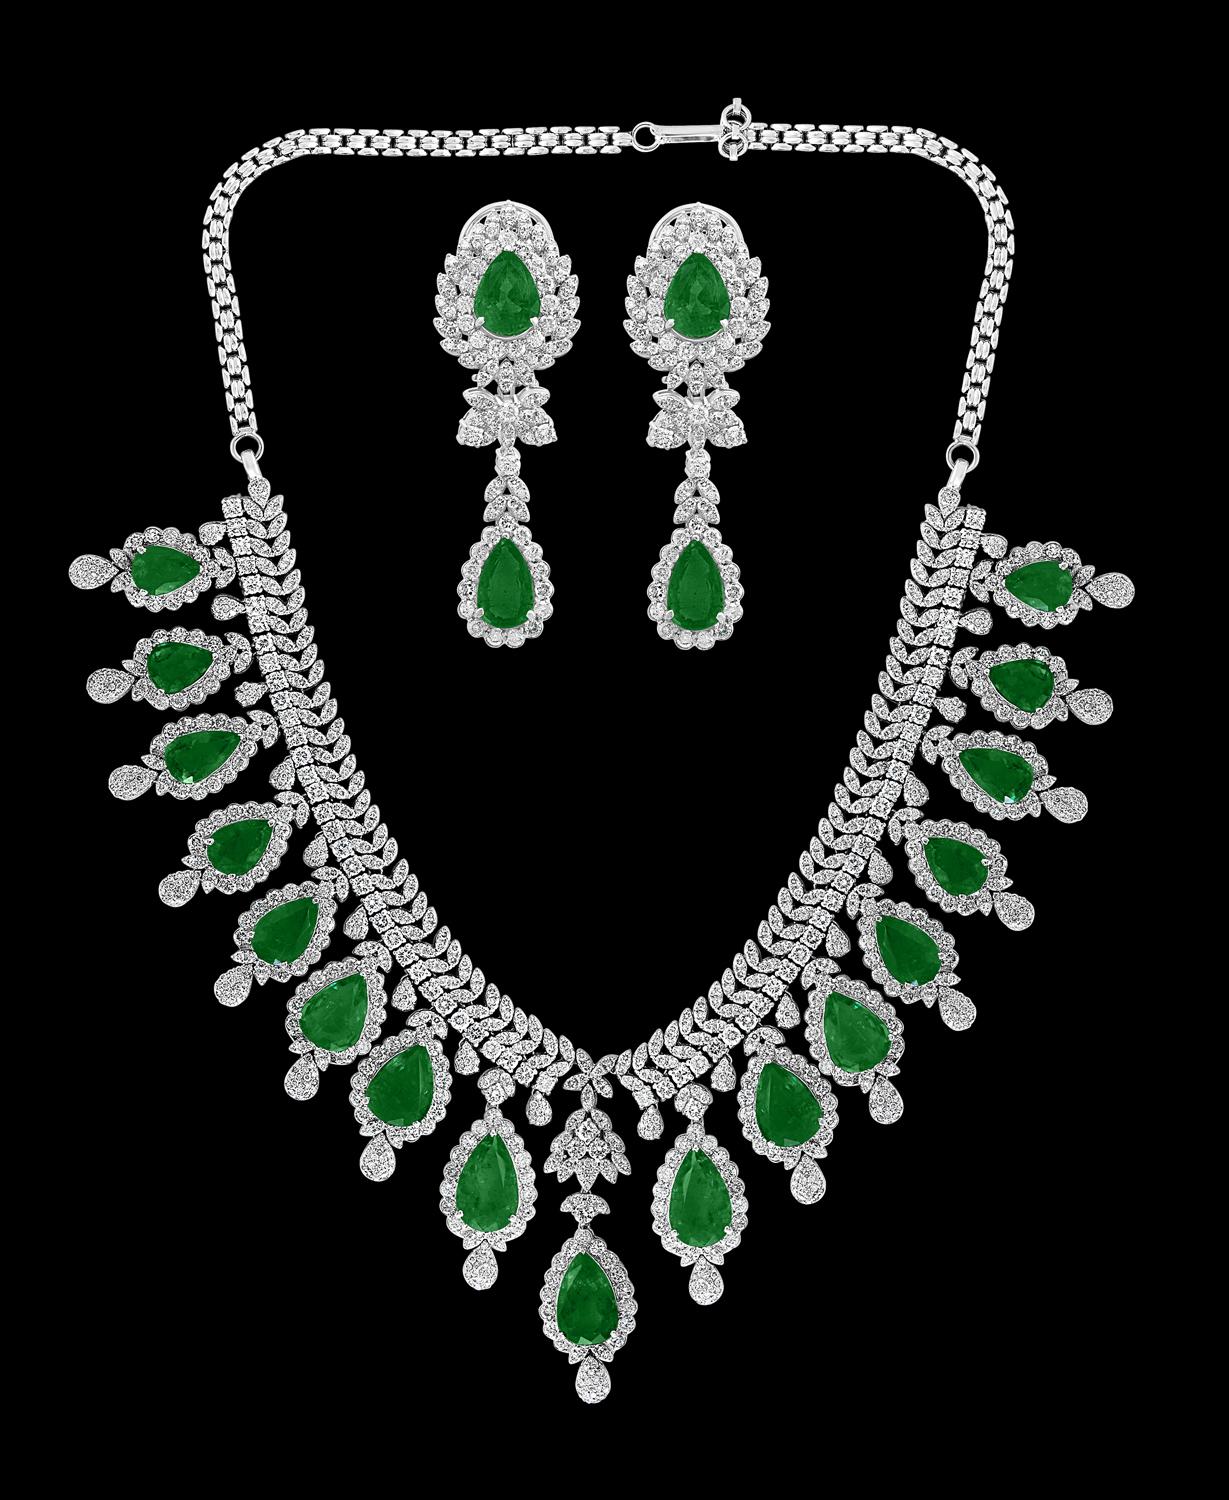 GIA Certified 75 Ct Emerald and 45 Ct Diamond Necklace and Earring ...